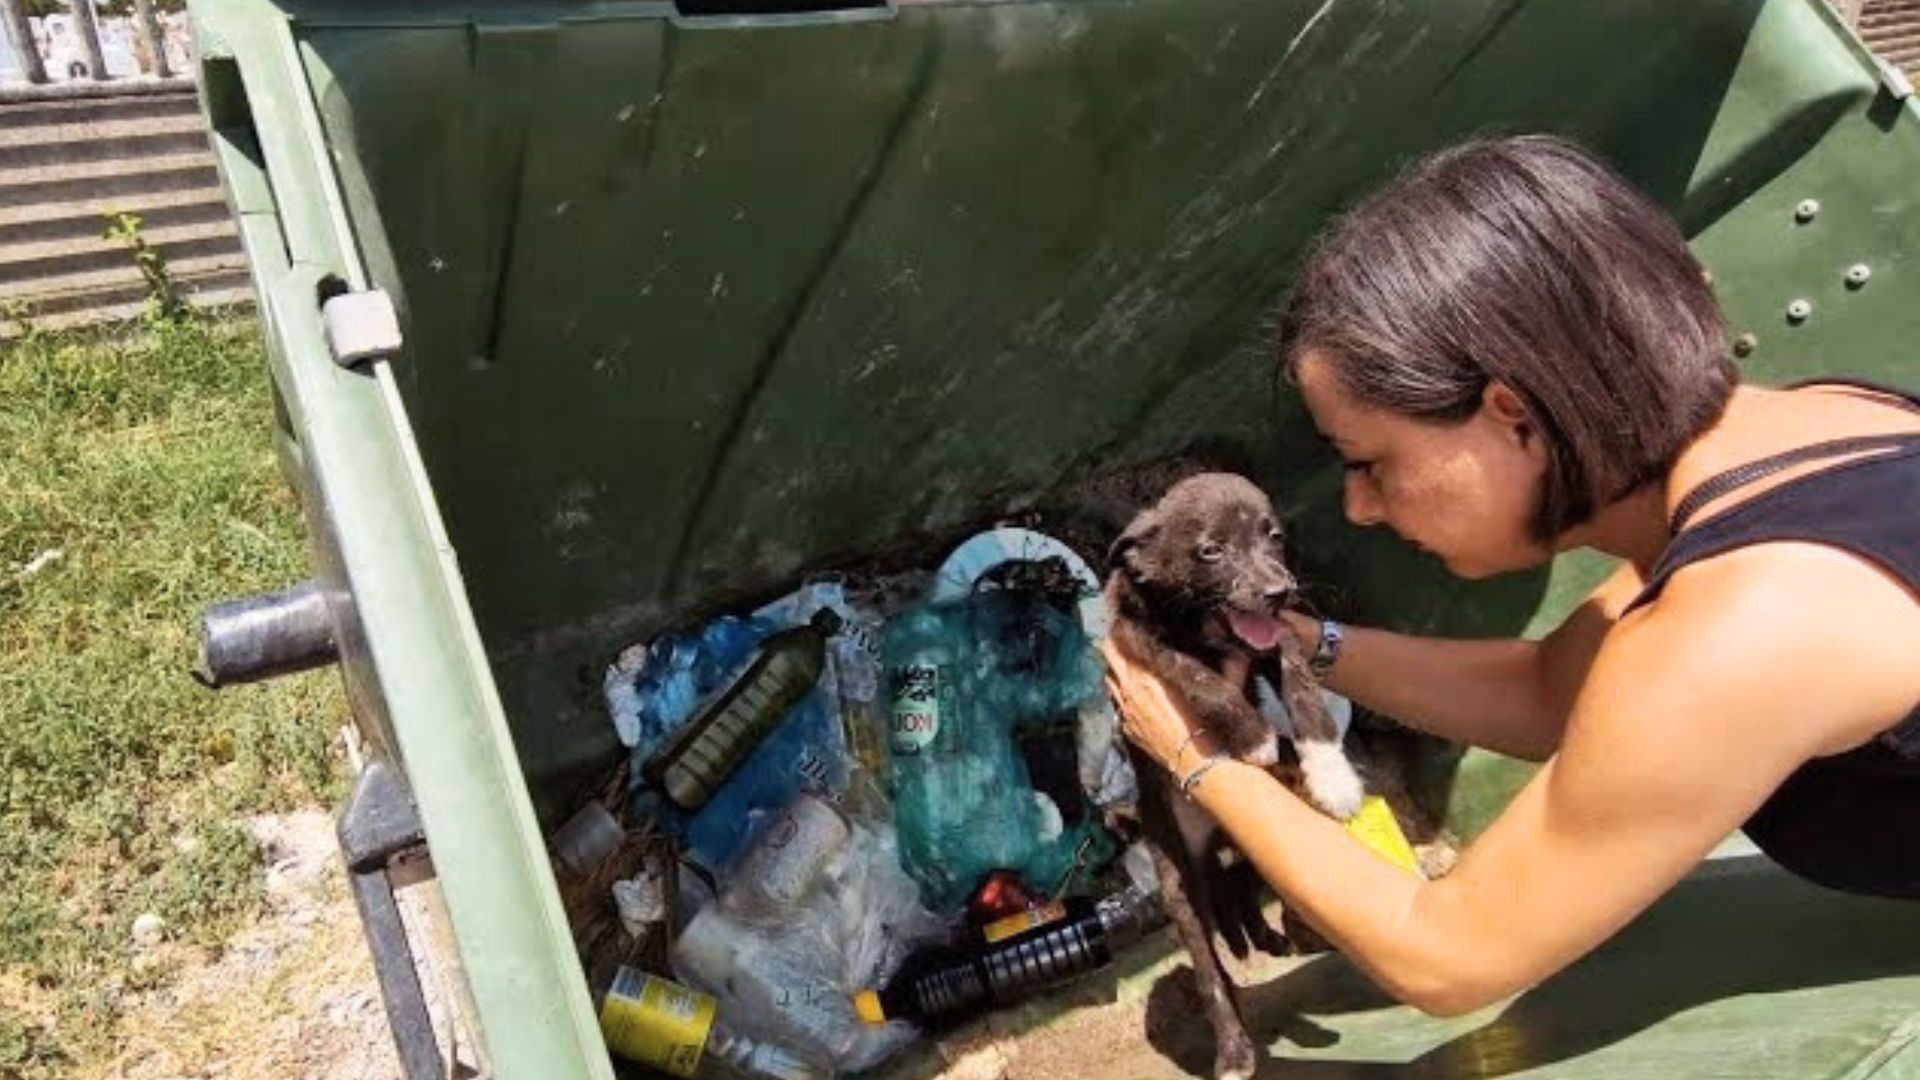 A Sweet Puppy Abandoned In A Trash Container And Left To Starve Finally Gets Help